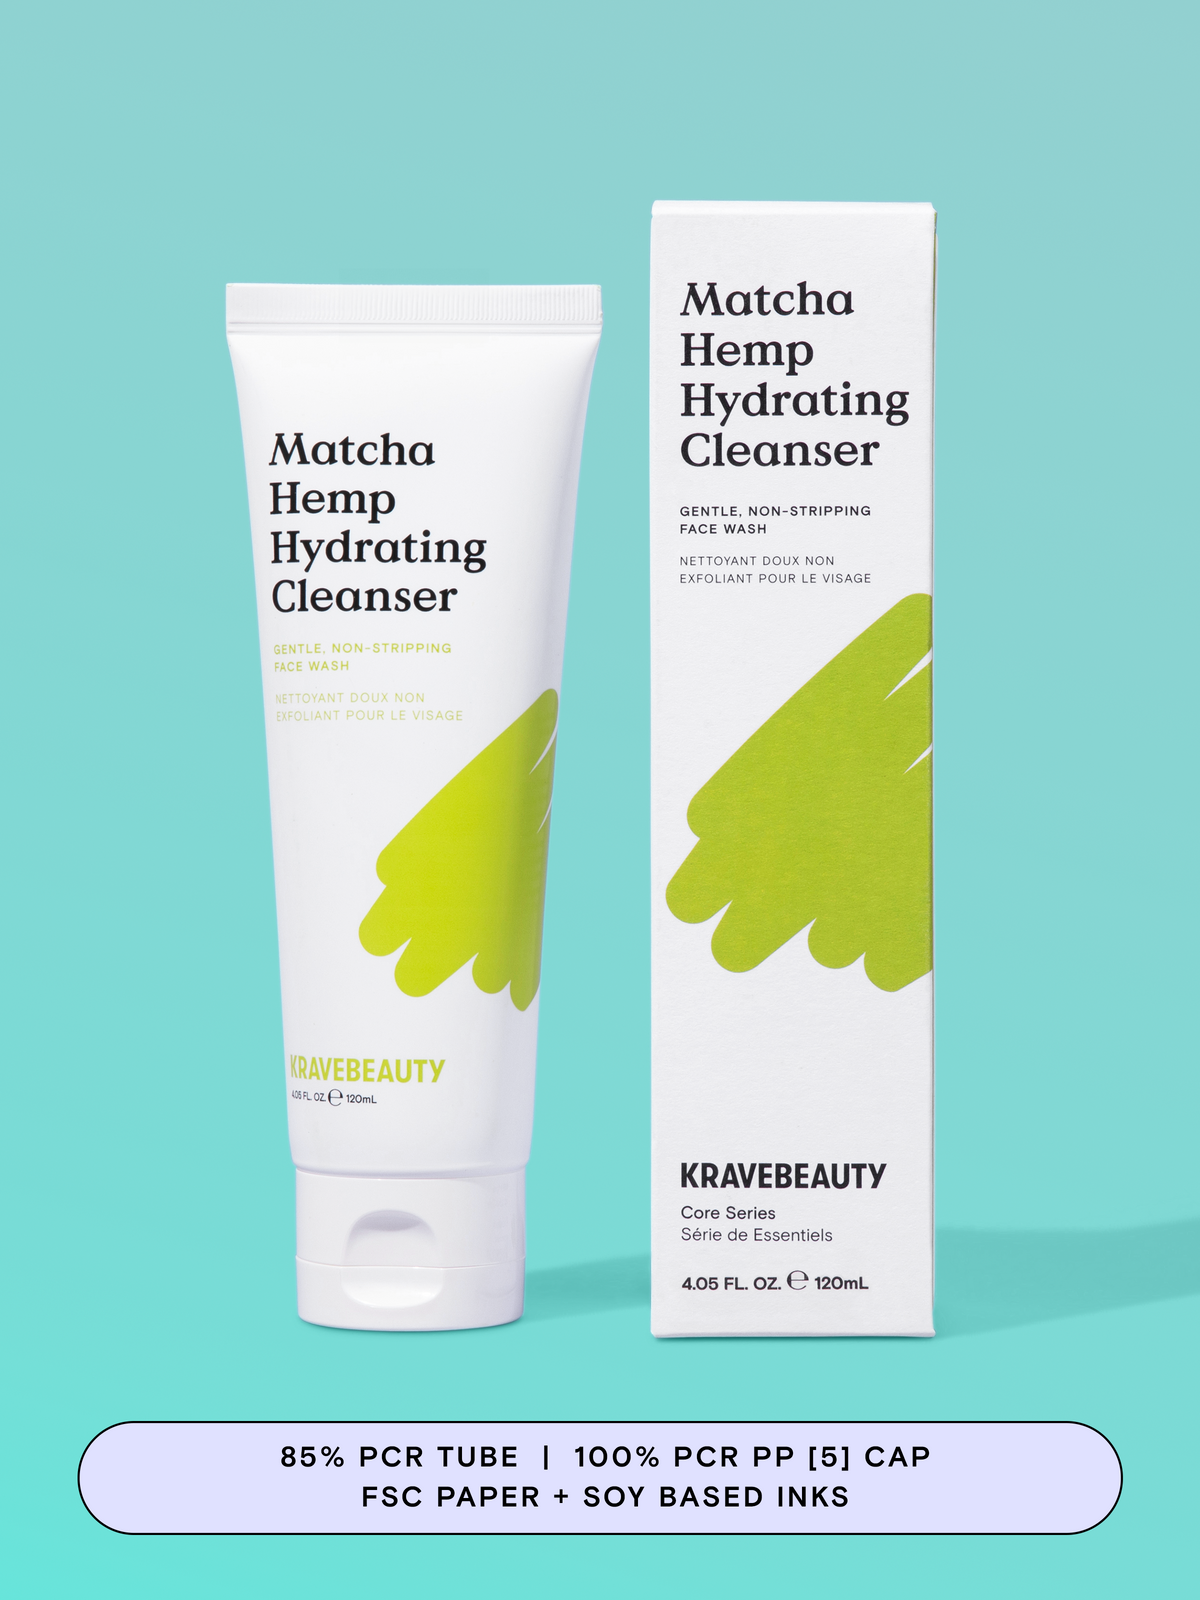 Matcha Hemp Hydrating Cleanser has a 85% PCR tube with a 100% PCR PP [5] cap. Box is made of FSC paper and soy based inks. #size_4.05 oz / 120 ml